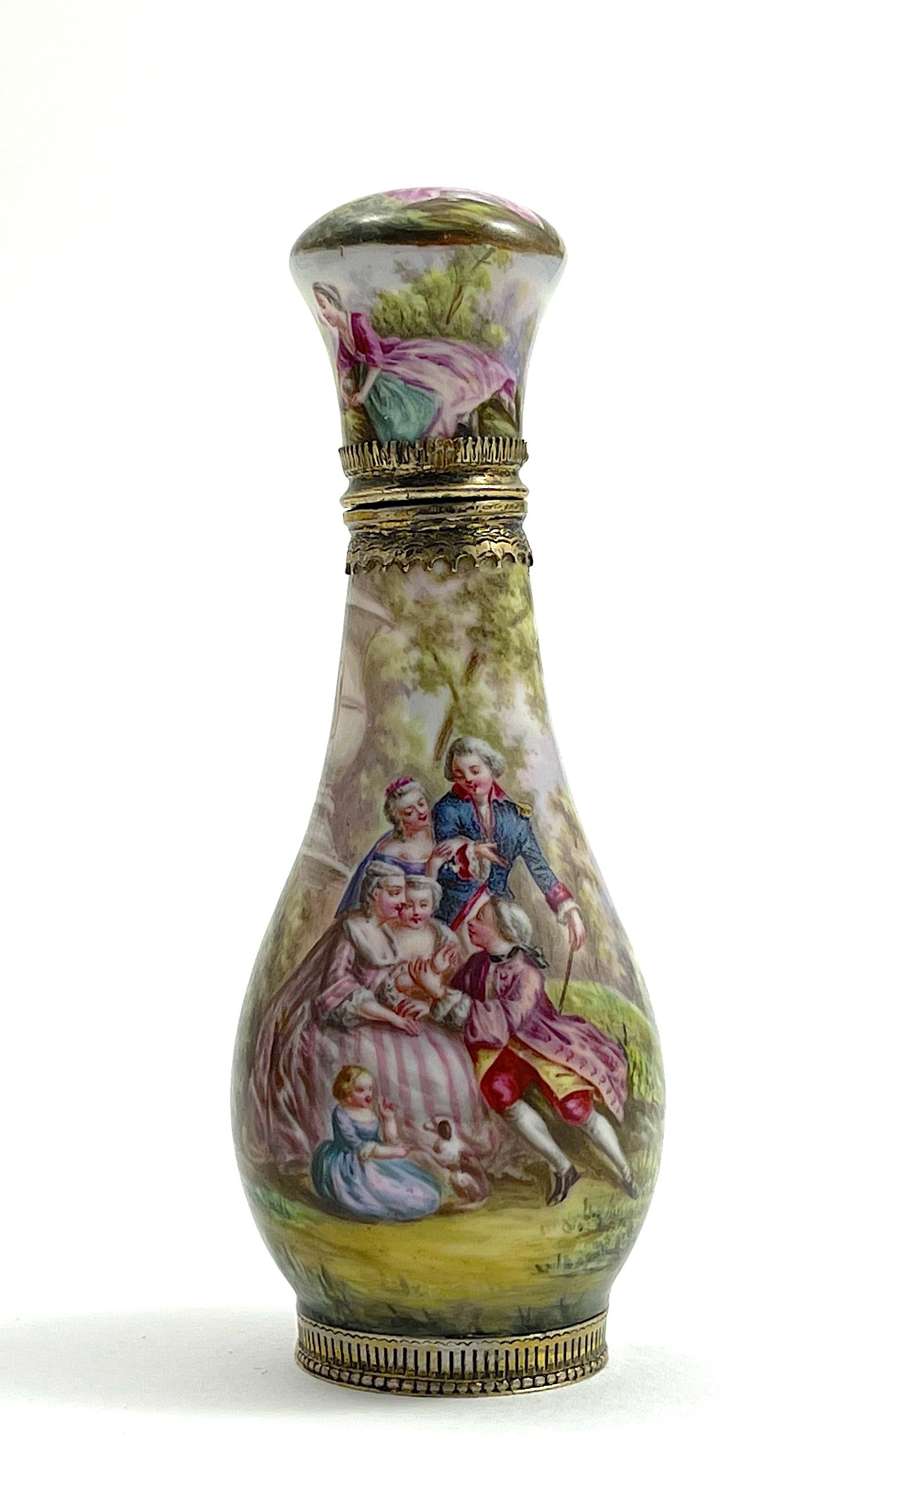 An Exceptional Antique French Limoges Silver and Enamel Perfume Bottle